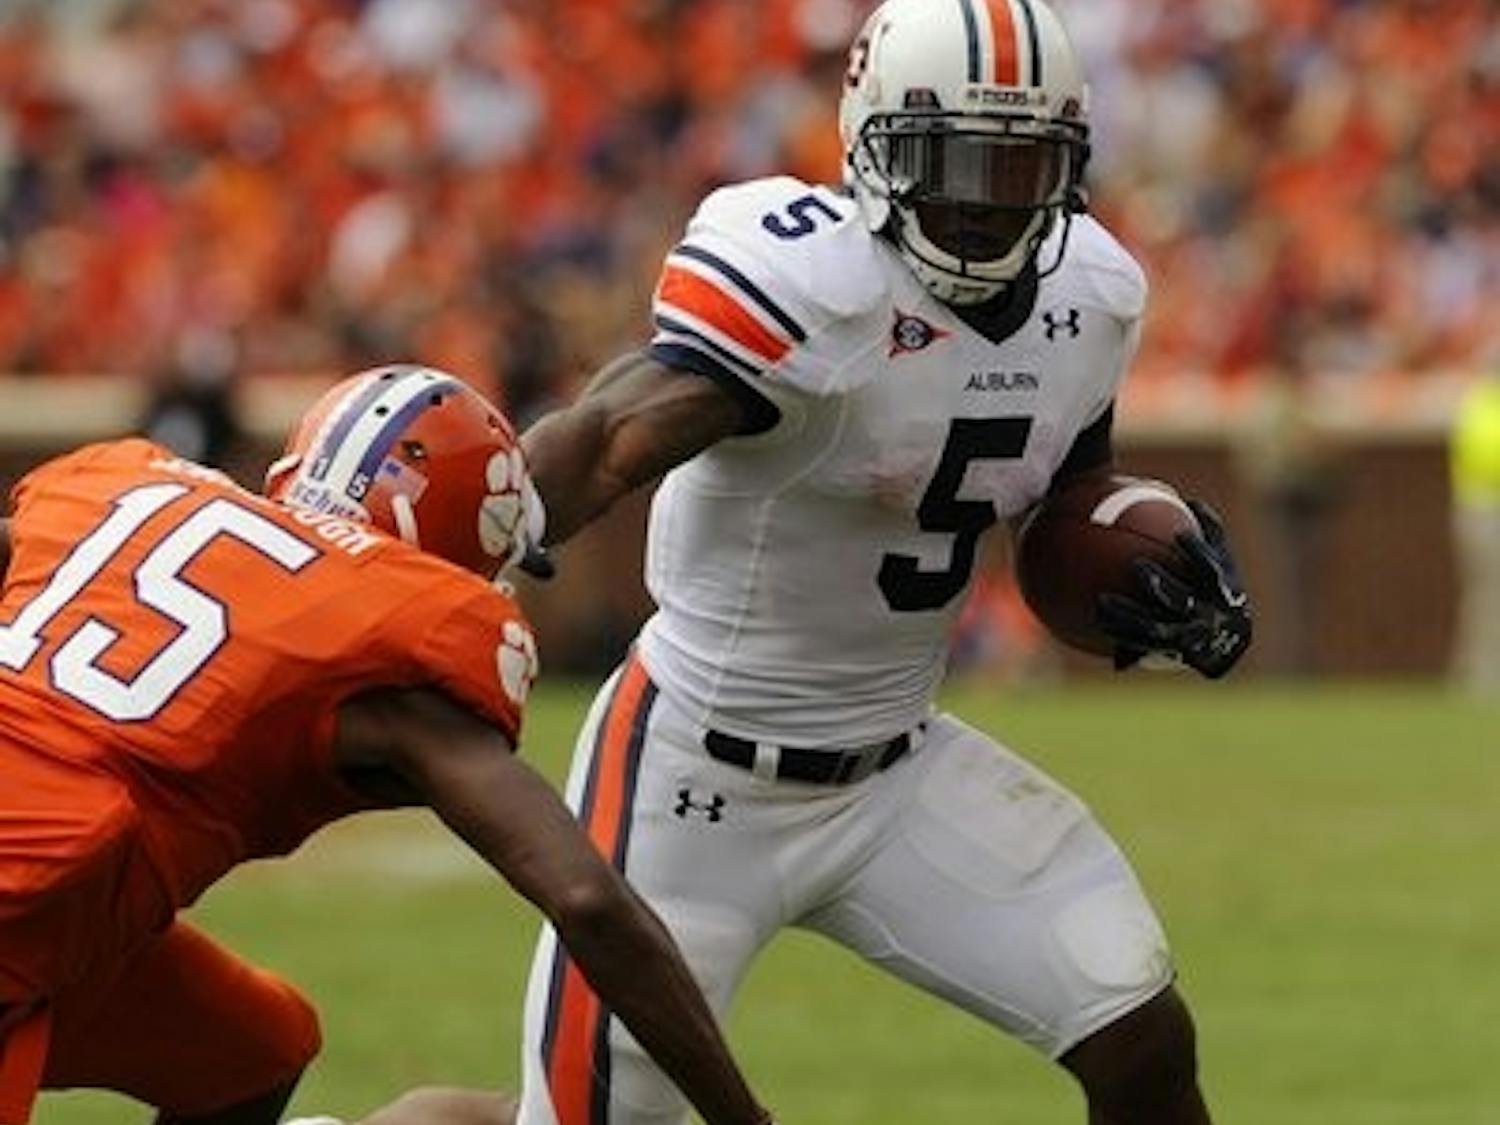 Running back Michael Dyer sprints from an opposing Tiger at Saturday's game. (Todd Van Emst / AUBURN MEDIA RELATIONS)